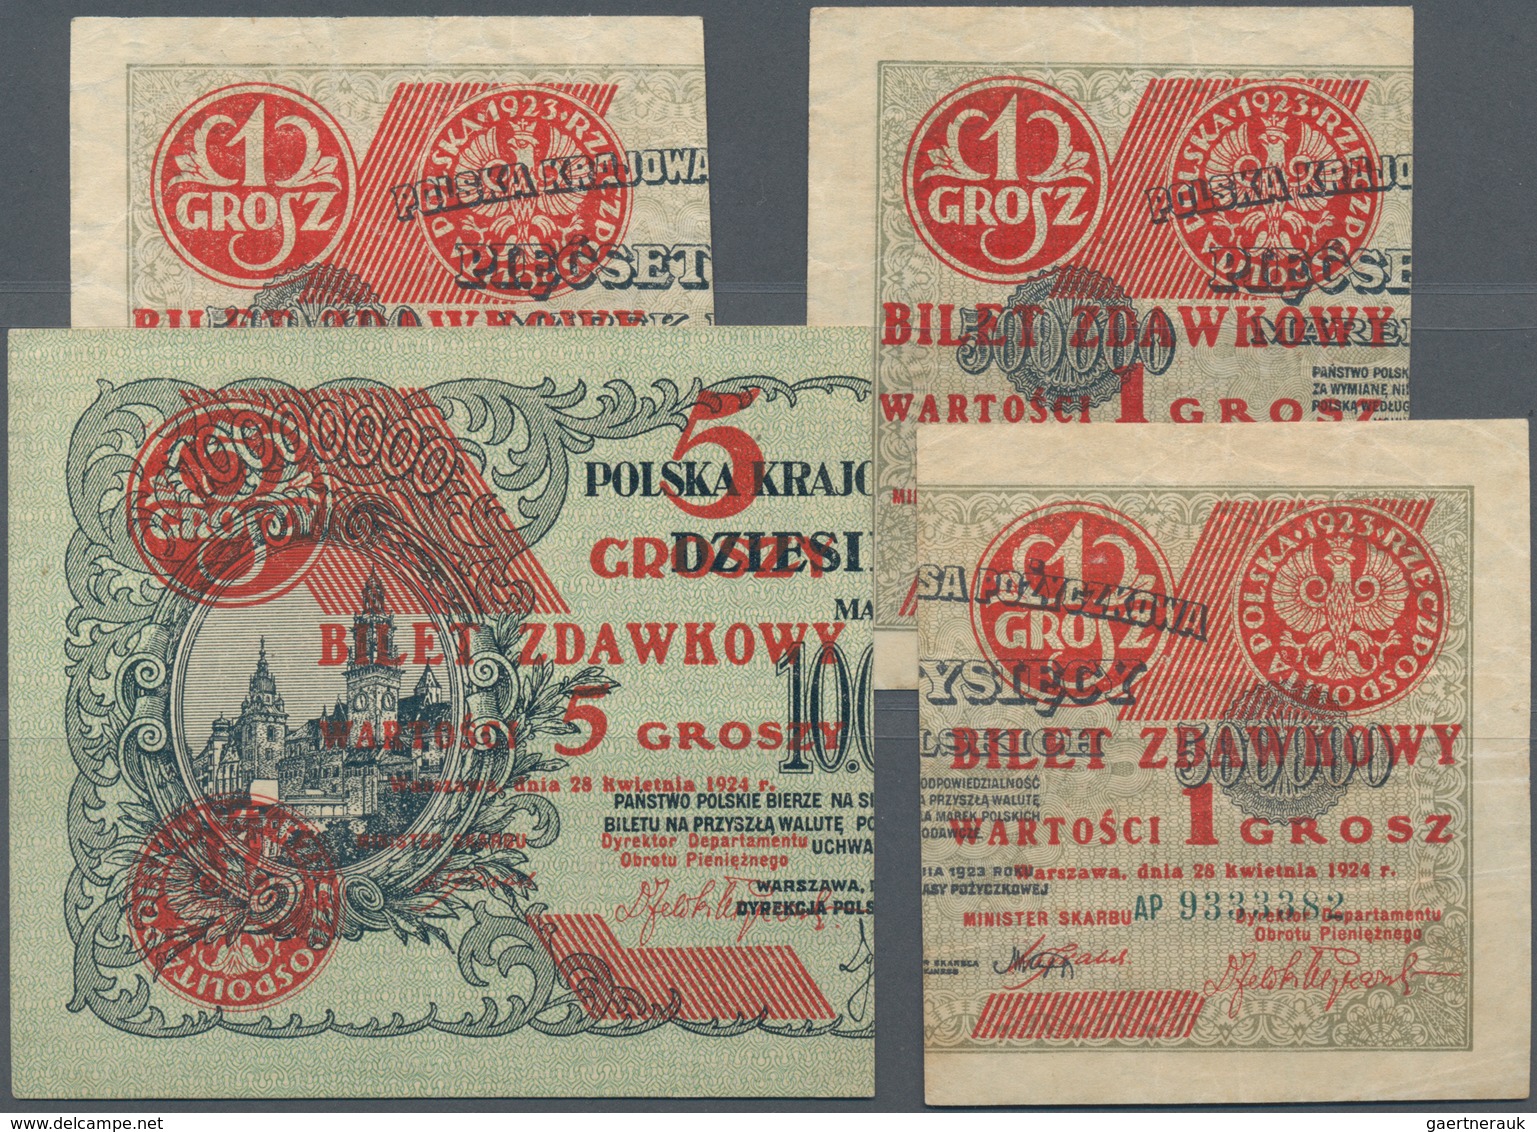 Poland / Polen: Set With 4 Banknotes Of The 1924 Provisional “Cut In Half” Notes “Bilet Zdawkowy” Wi - Polonia